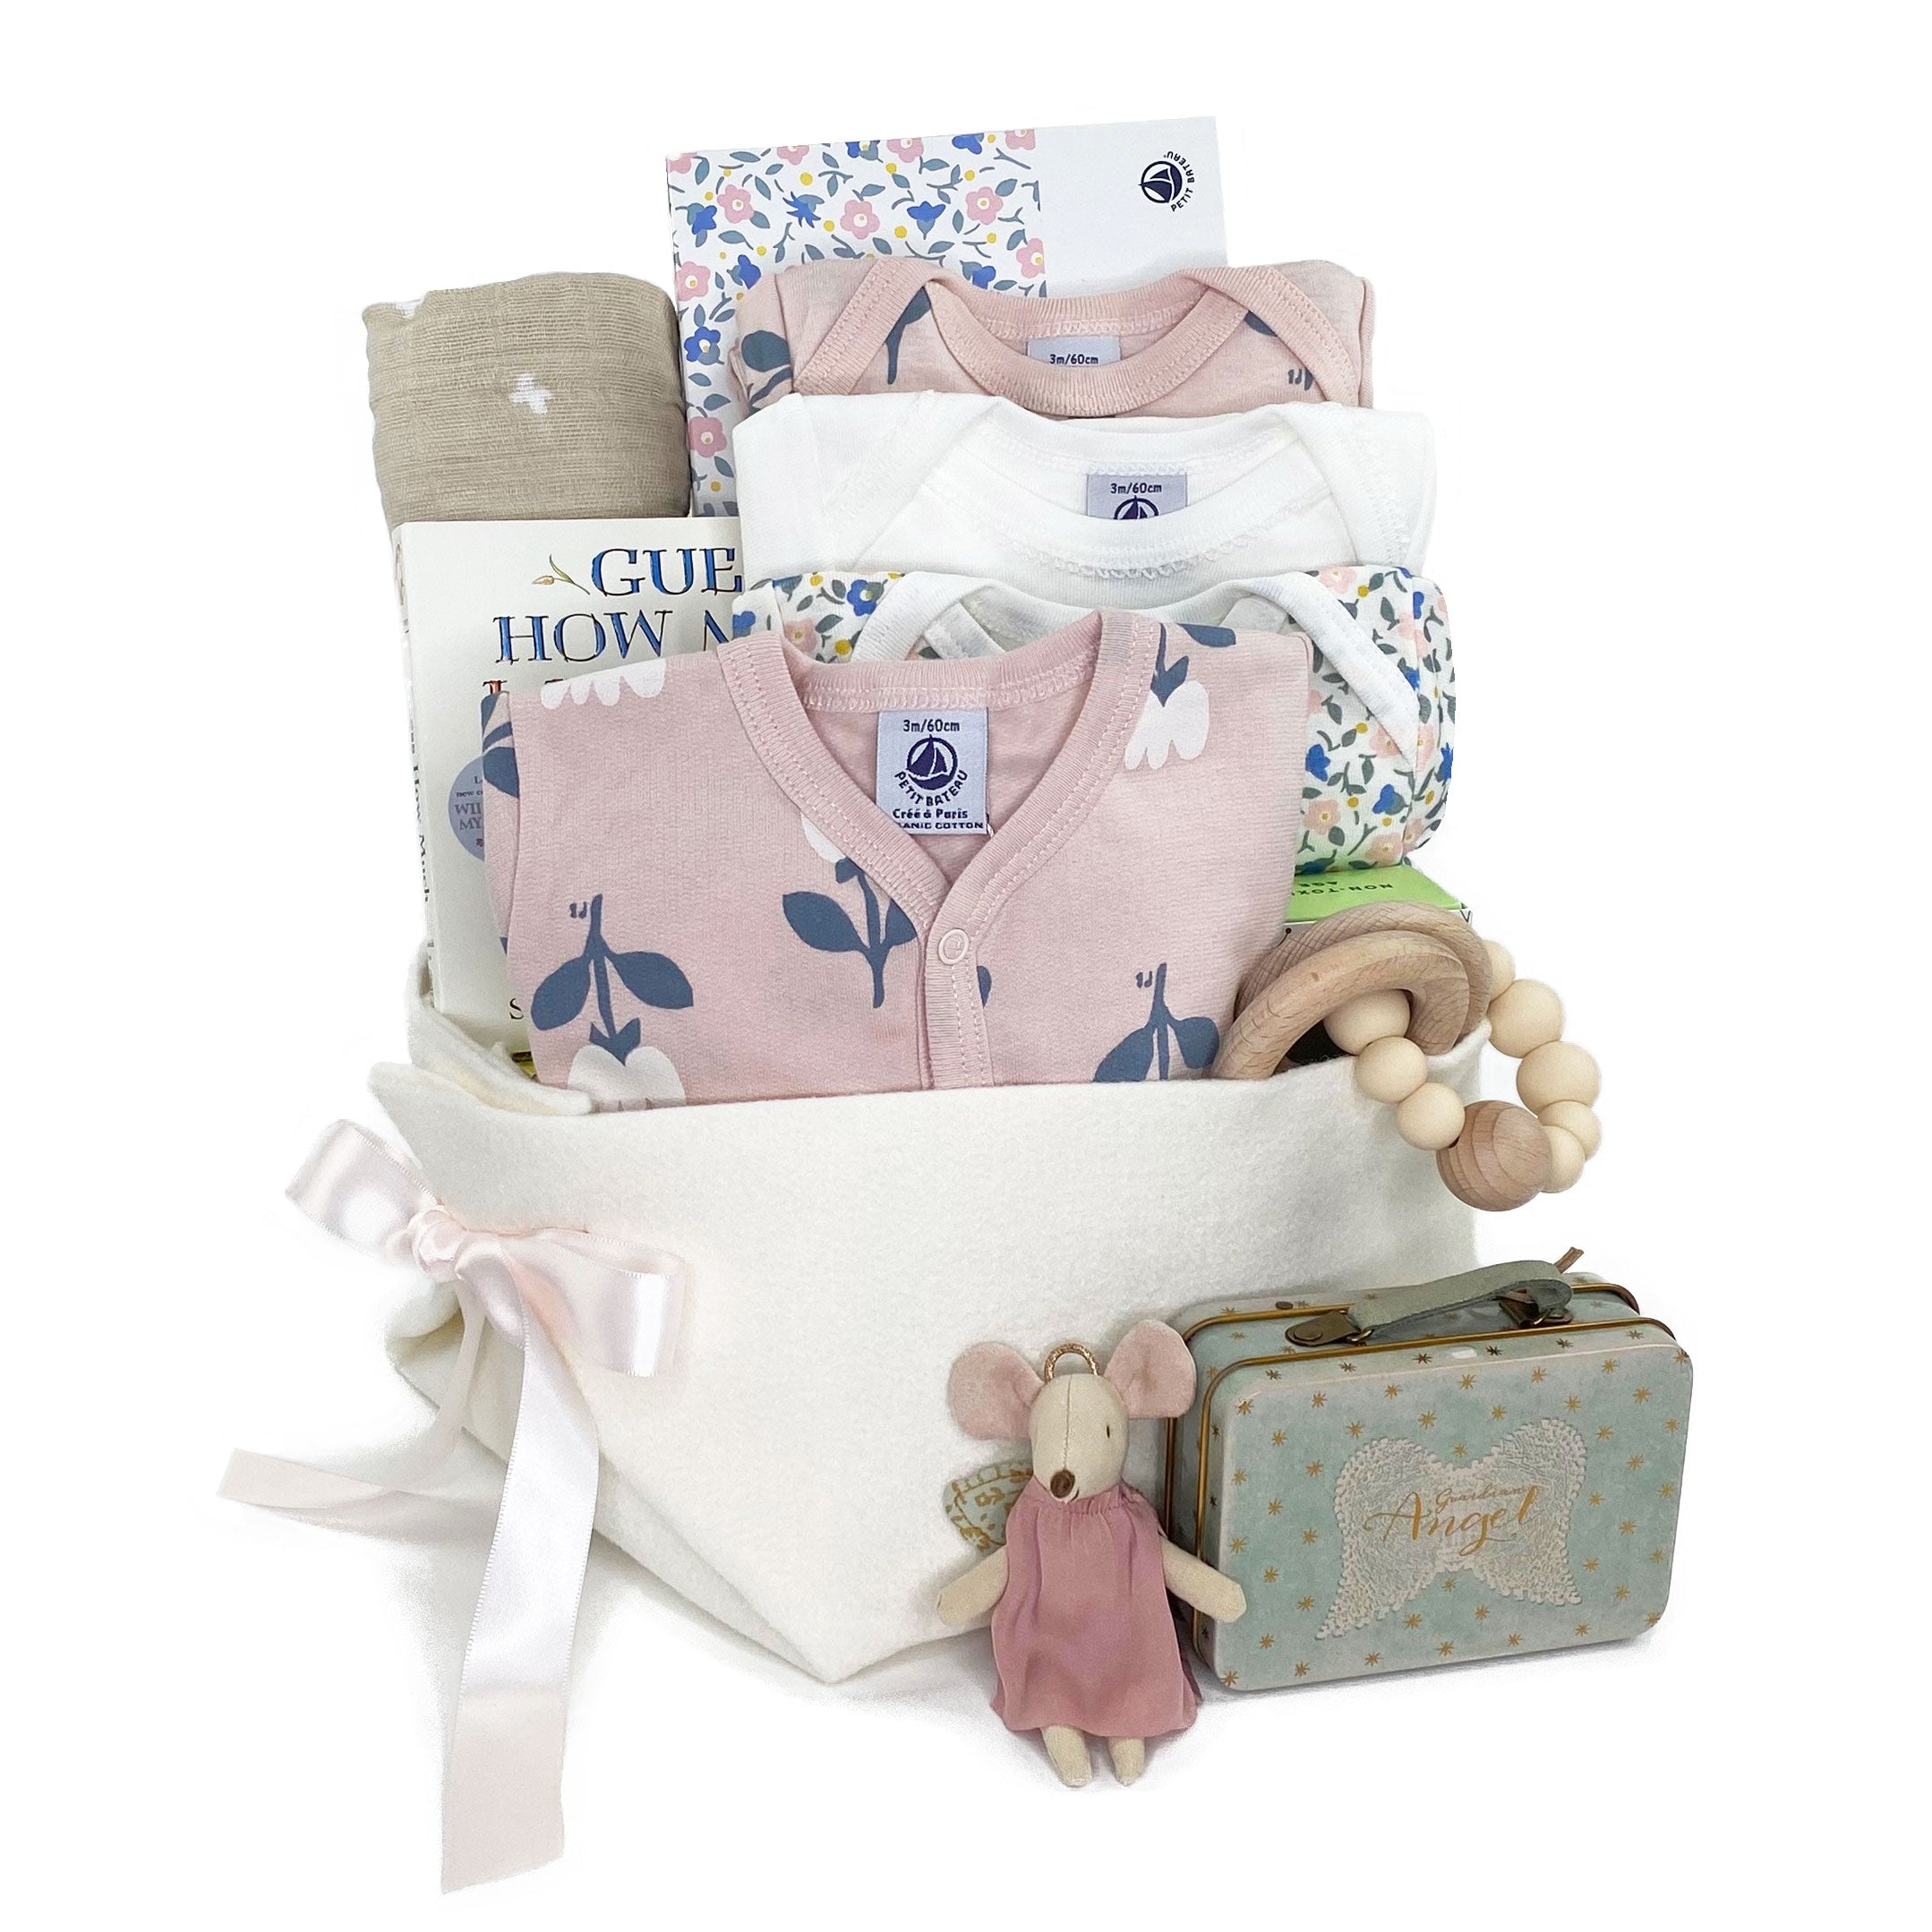 Why Our Baby Gift Baskets Stand Apart? 